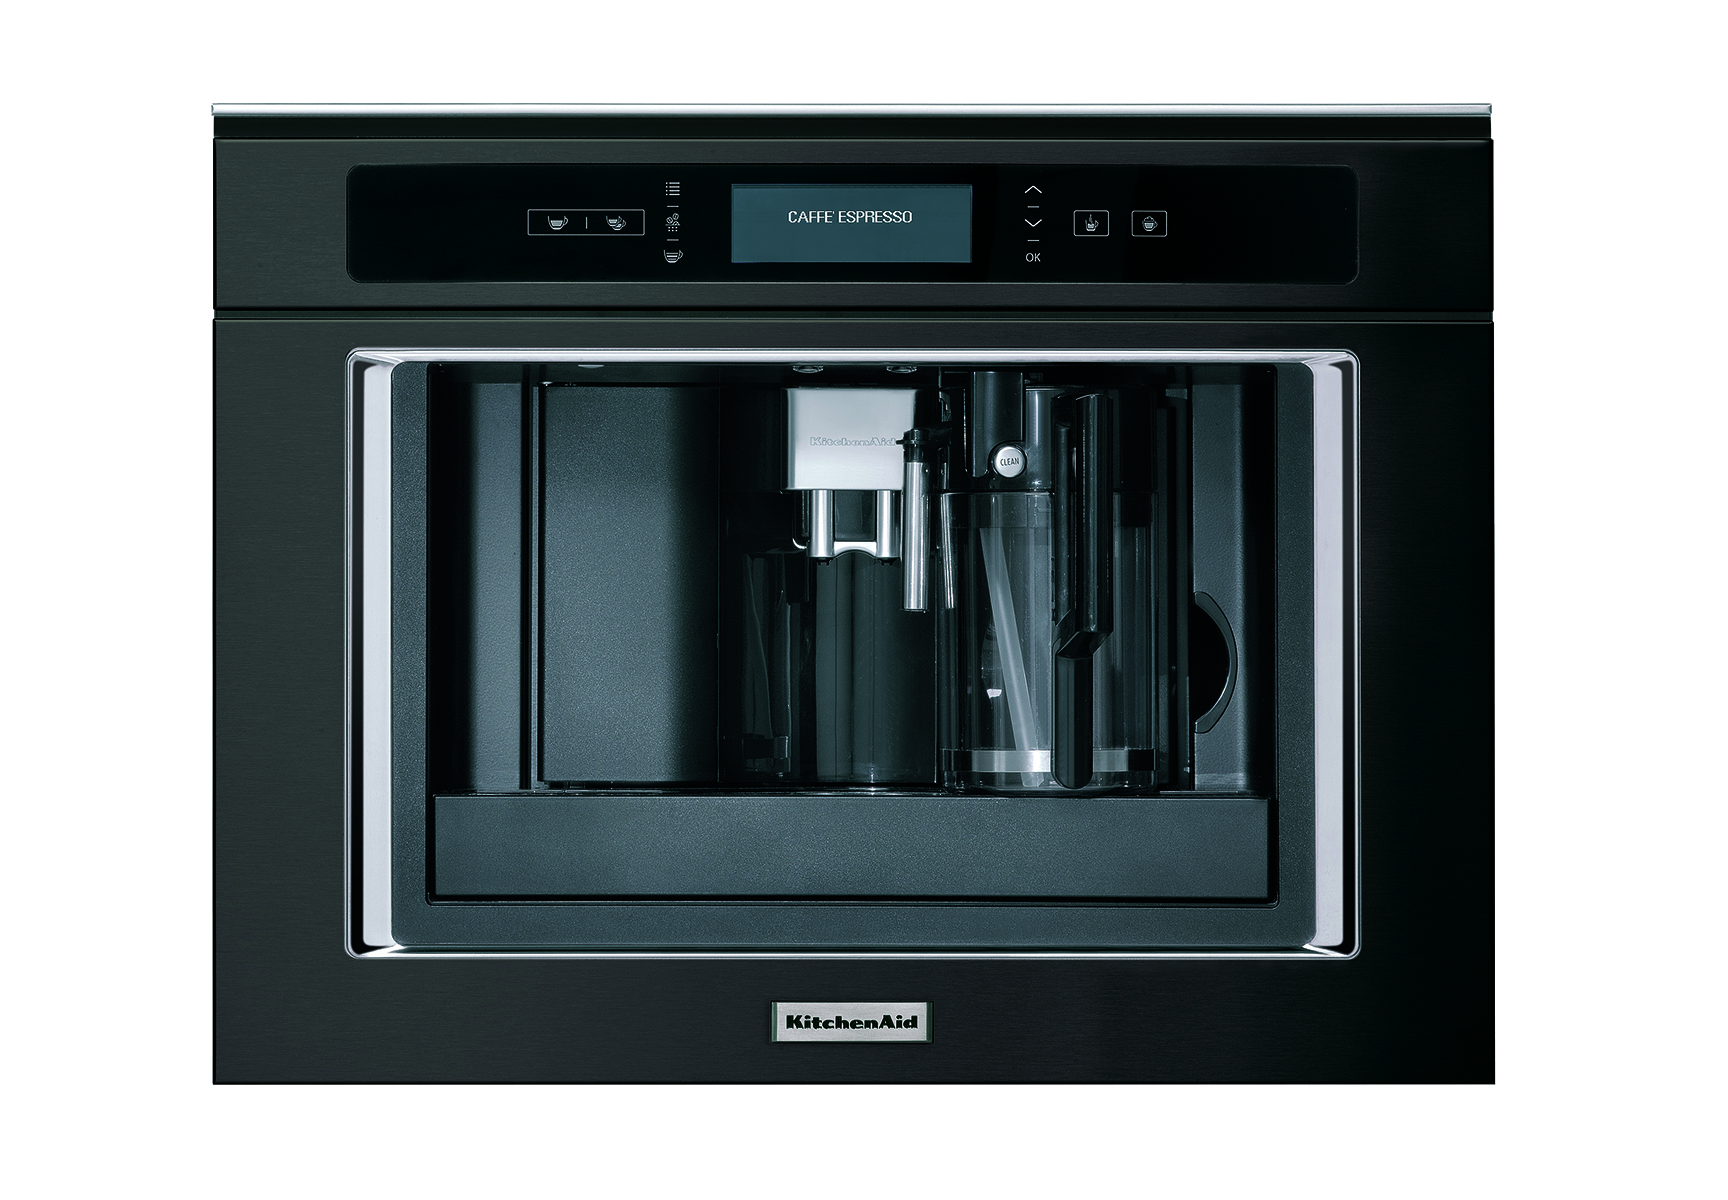 DISCOVER KITCHENAID’S ELEGANT AESTHETIC WITH THE EXTENDED BLACK STAINLESS STEEL RANGE